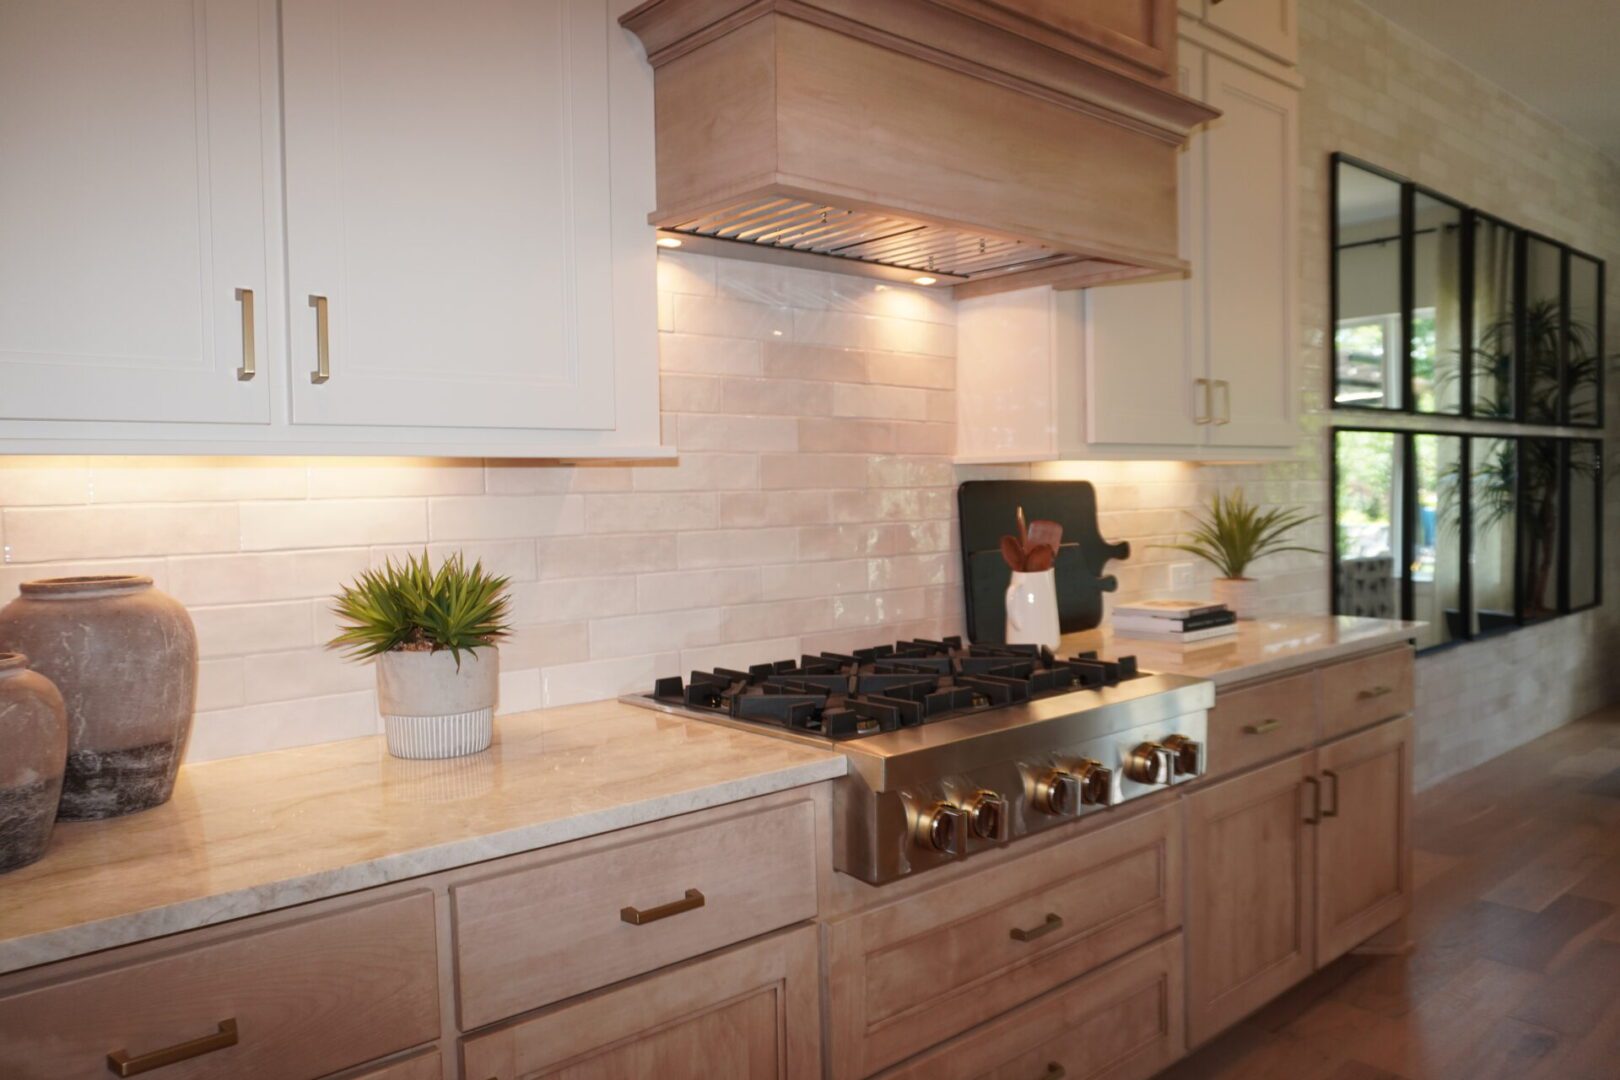 A kitchen with white cabinets and beige counters.